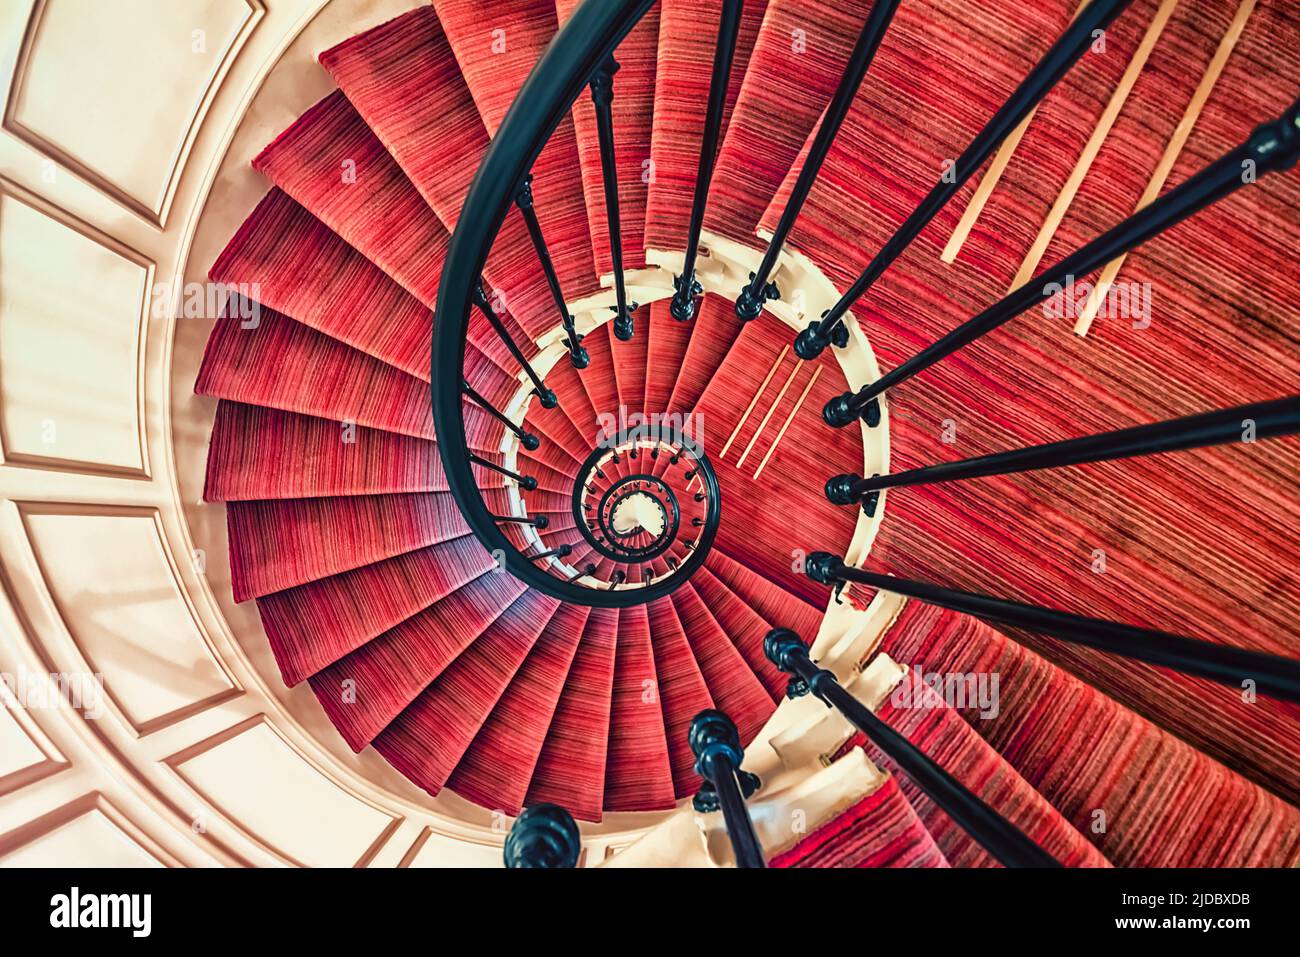 Spiral staircase architectural concept Stock Photo